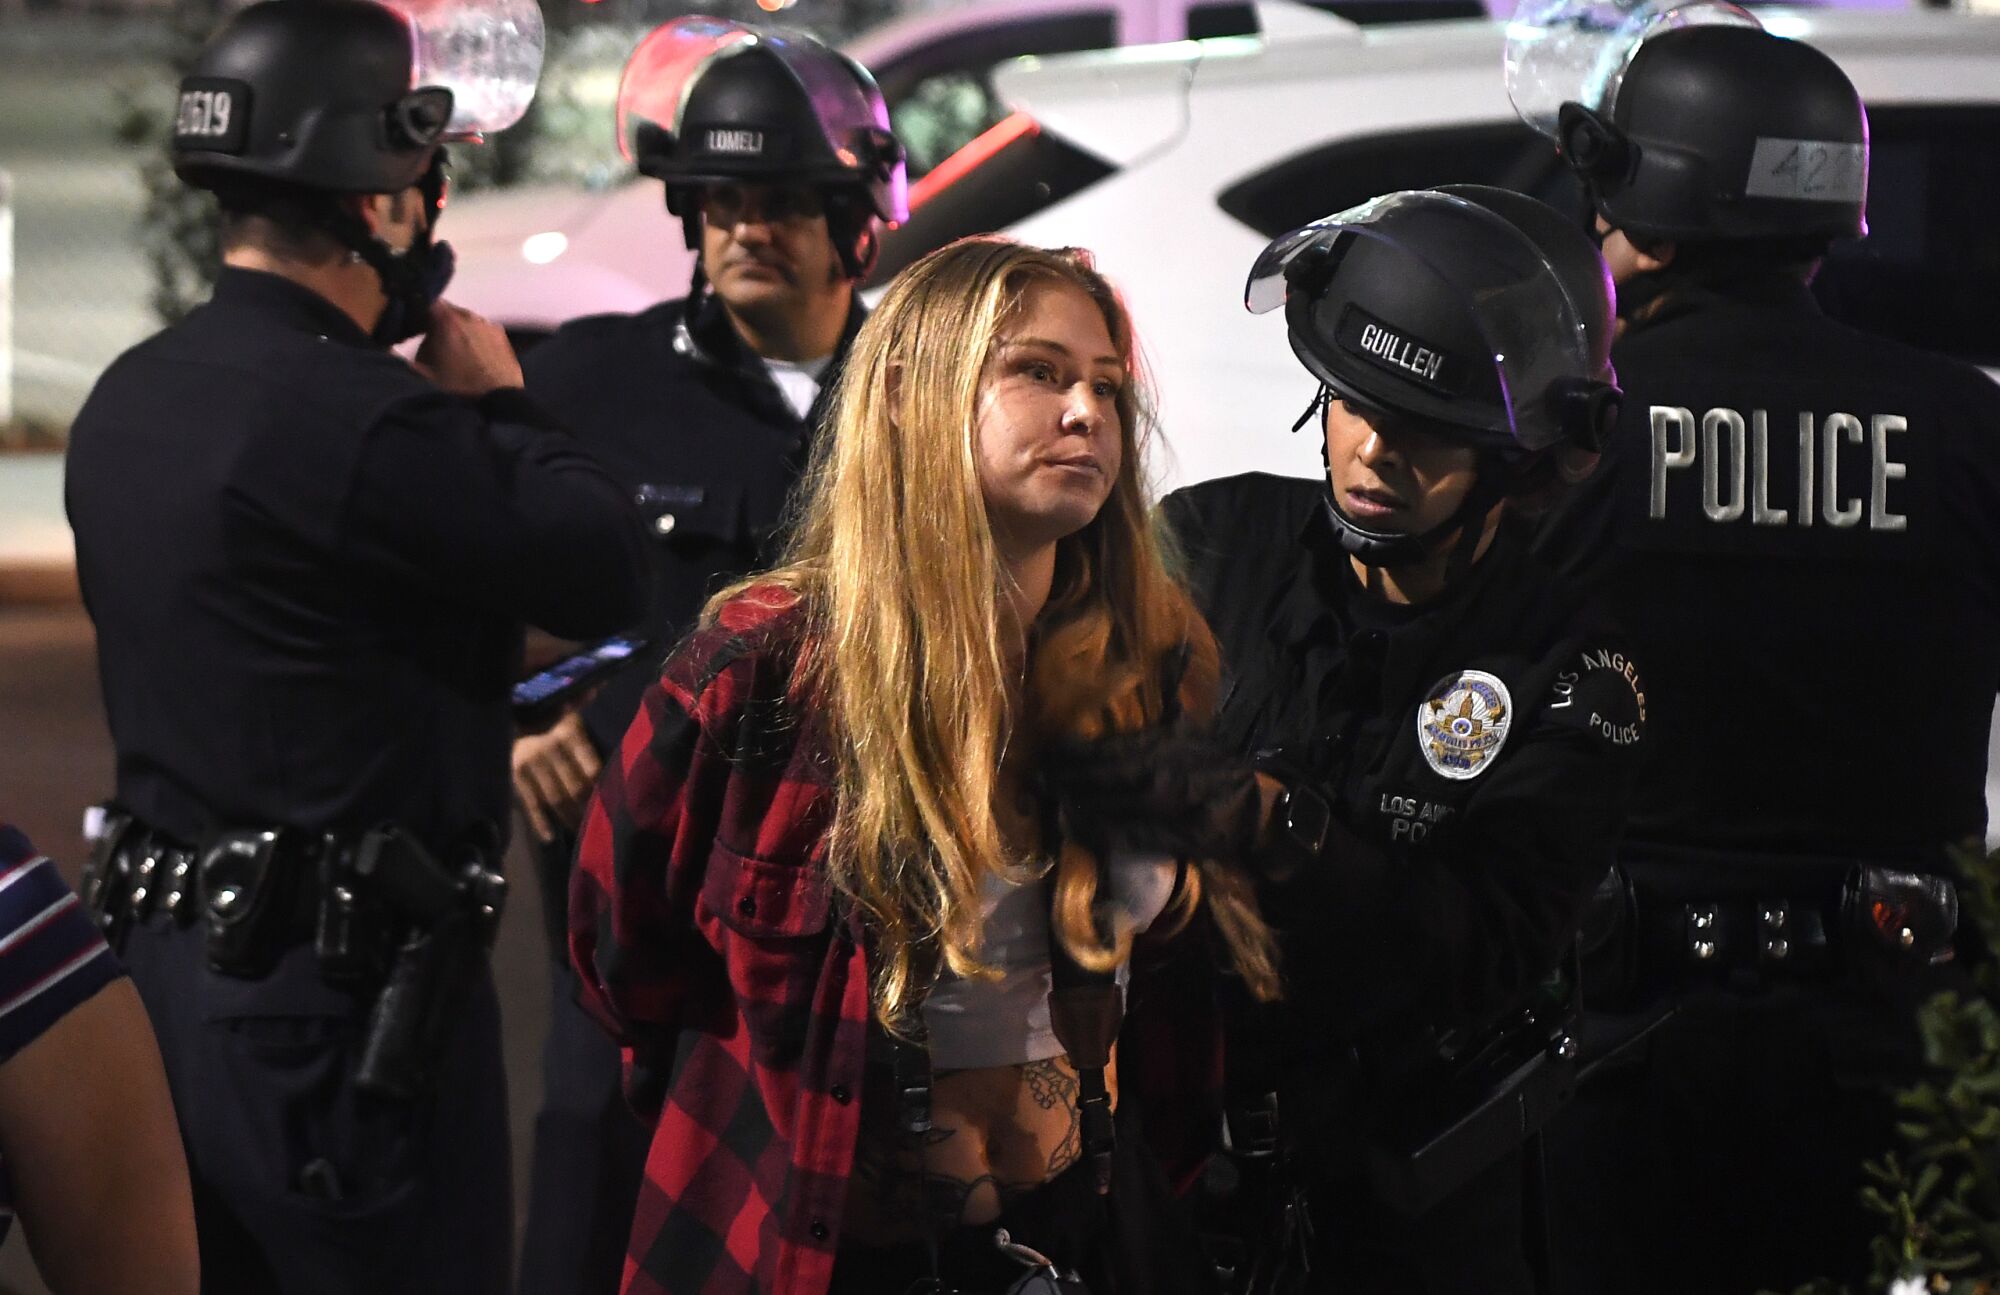 Police detain protesters near 18th and Figueroa streets in downtown Los Angeles on Tuesday night.